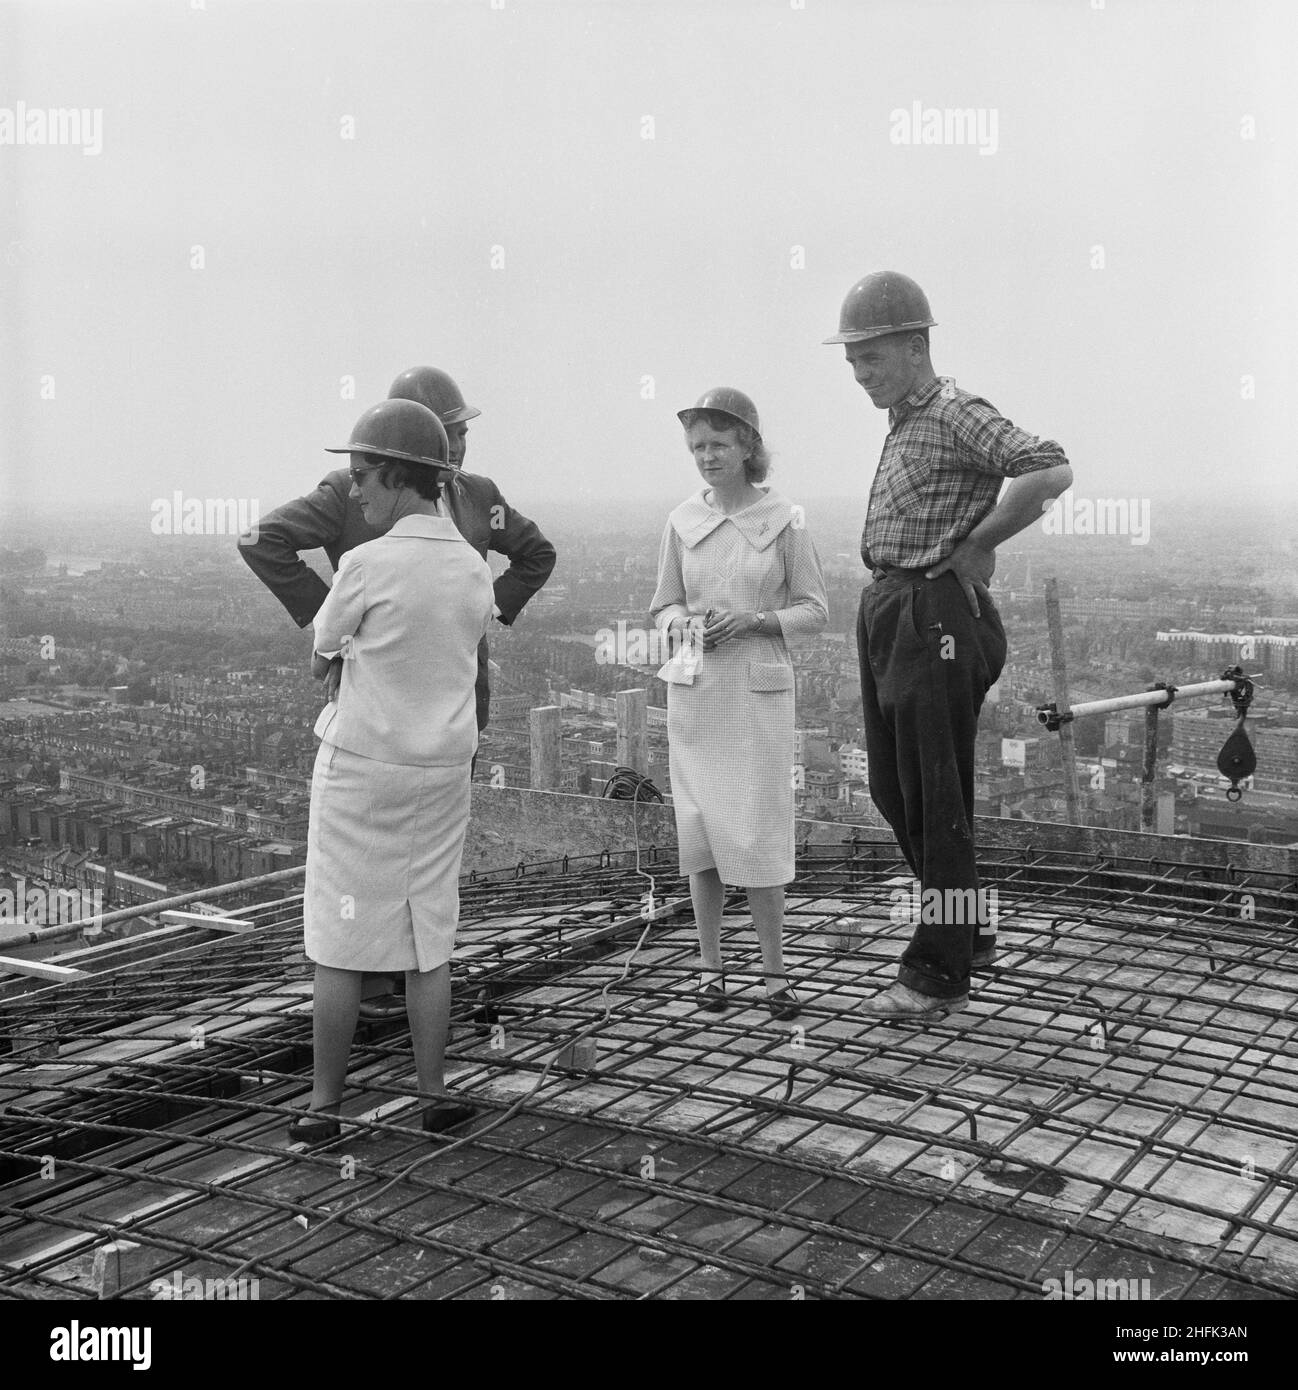 Empress State Building, Lillie Road, Earl's Court, Hammersmith and Fulham, London, 03/07/1961. Two women with a construction worker and manager gathered on the roof of Empress State Building, to watch the final concrete pour. Laing built the foundations and the reinforced concrete frame of the building, work began in November 1959 and ran until July 1961. The group were gathered on the roof to the watch the final pour of concrete to complete the project. Stock Photo